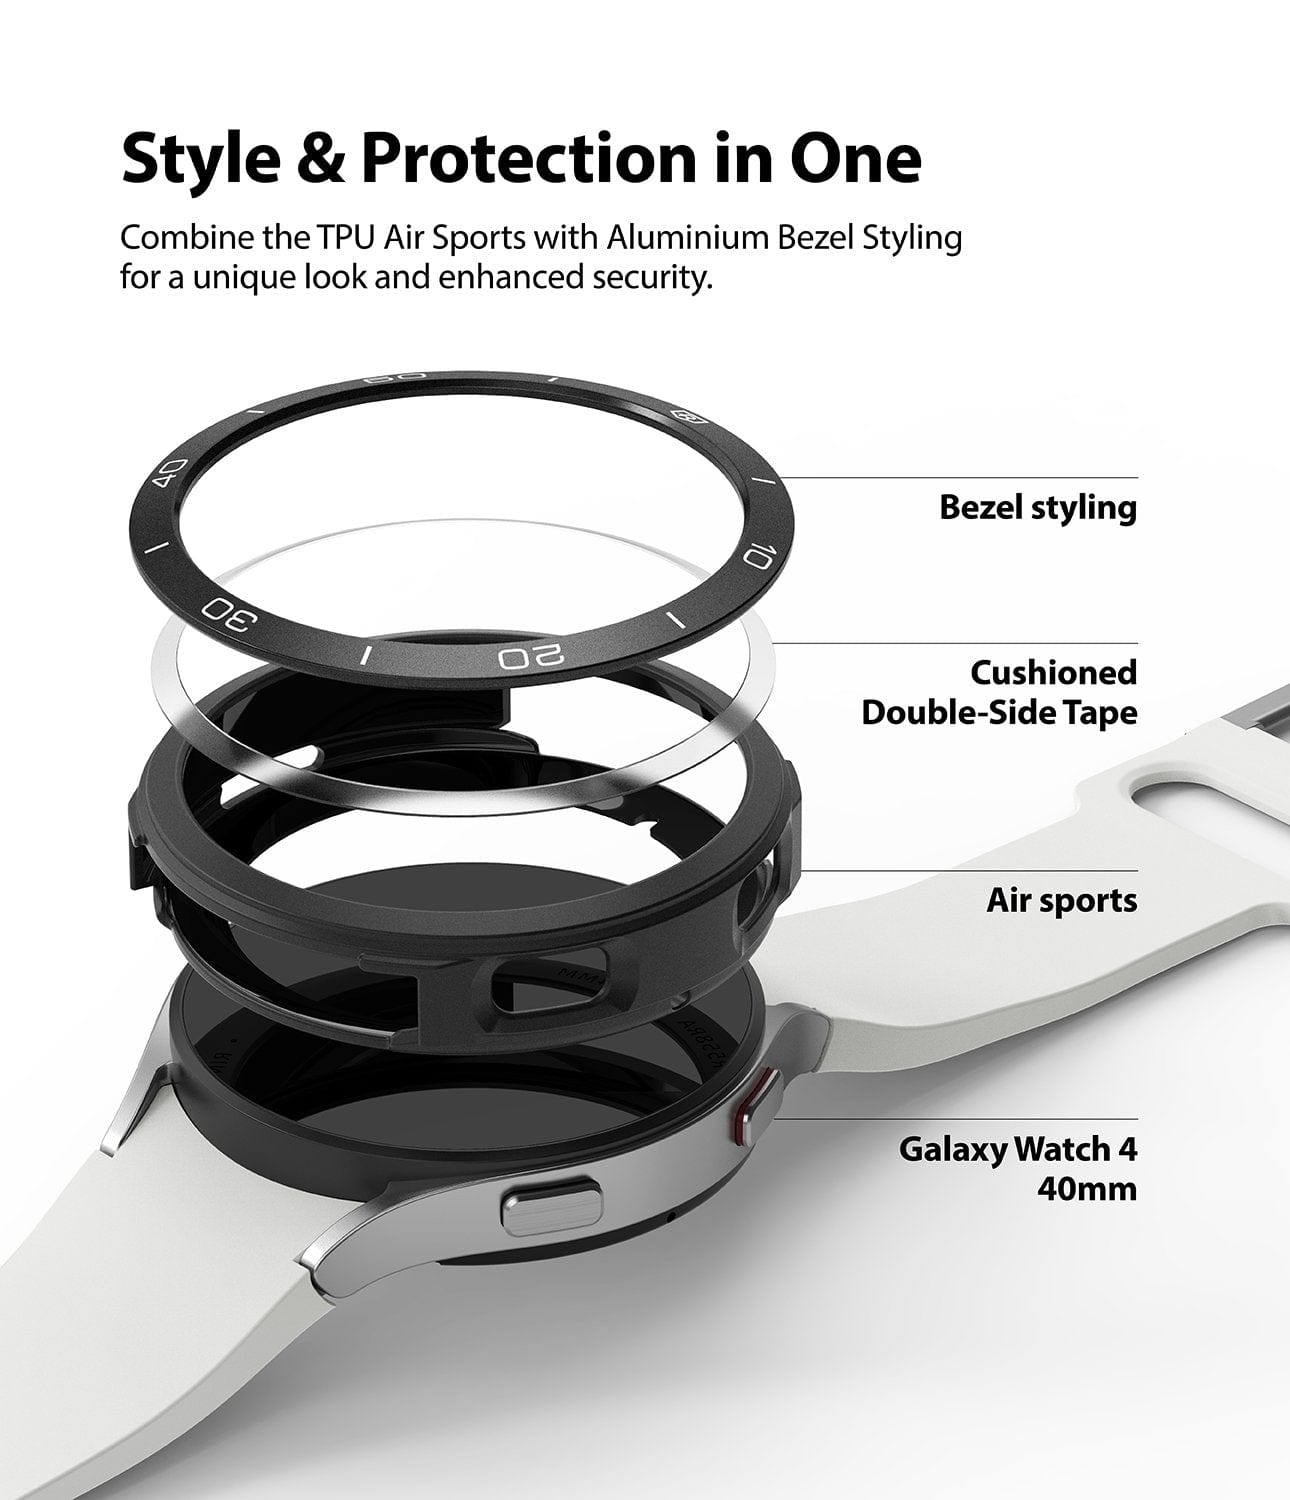 Enhance your Galaxy Watch 4's protection with a lightweight TPU case and premium aluminum bezel ring